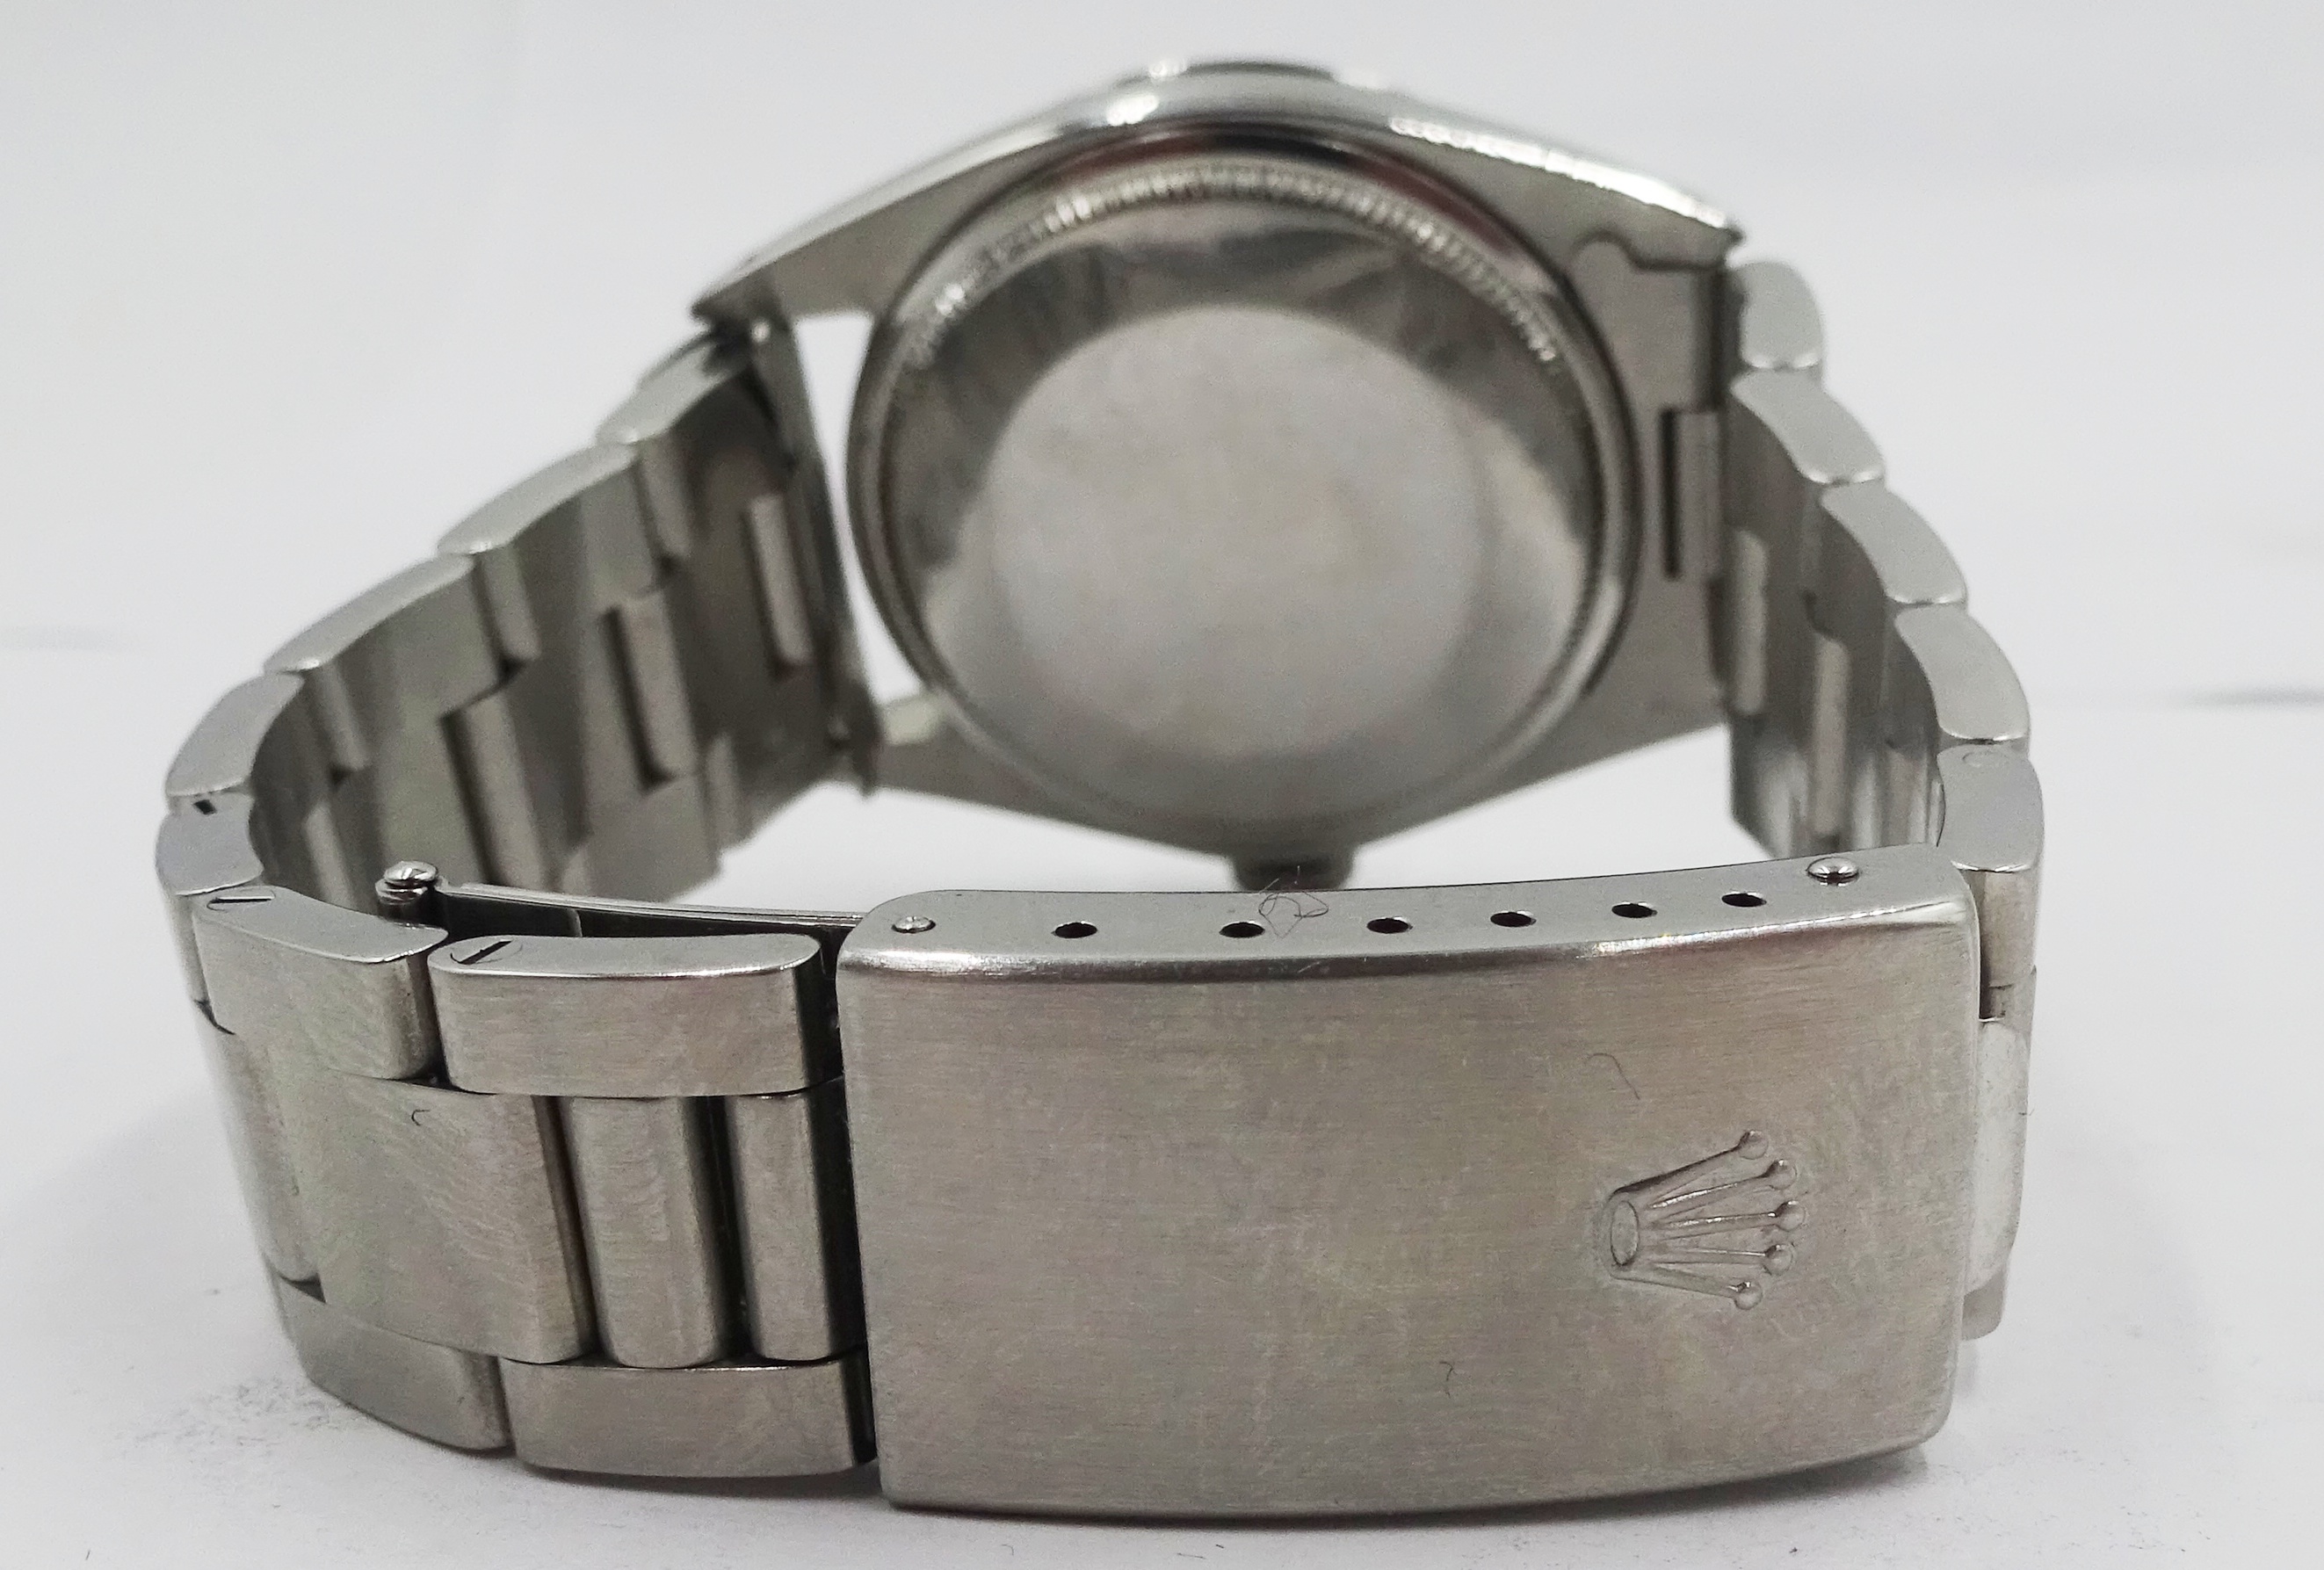 Rolex Oyster Perpetual Date gentleman's stainless steel wristwatch c.1970/1, model no. - Image 11 of 12